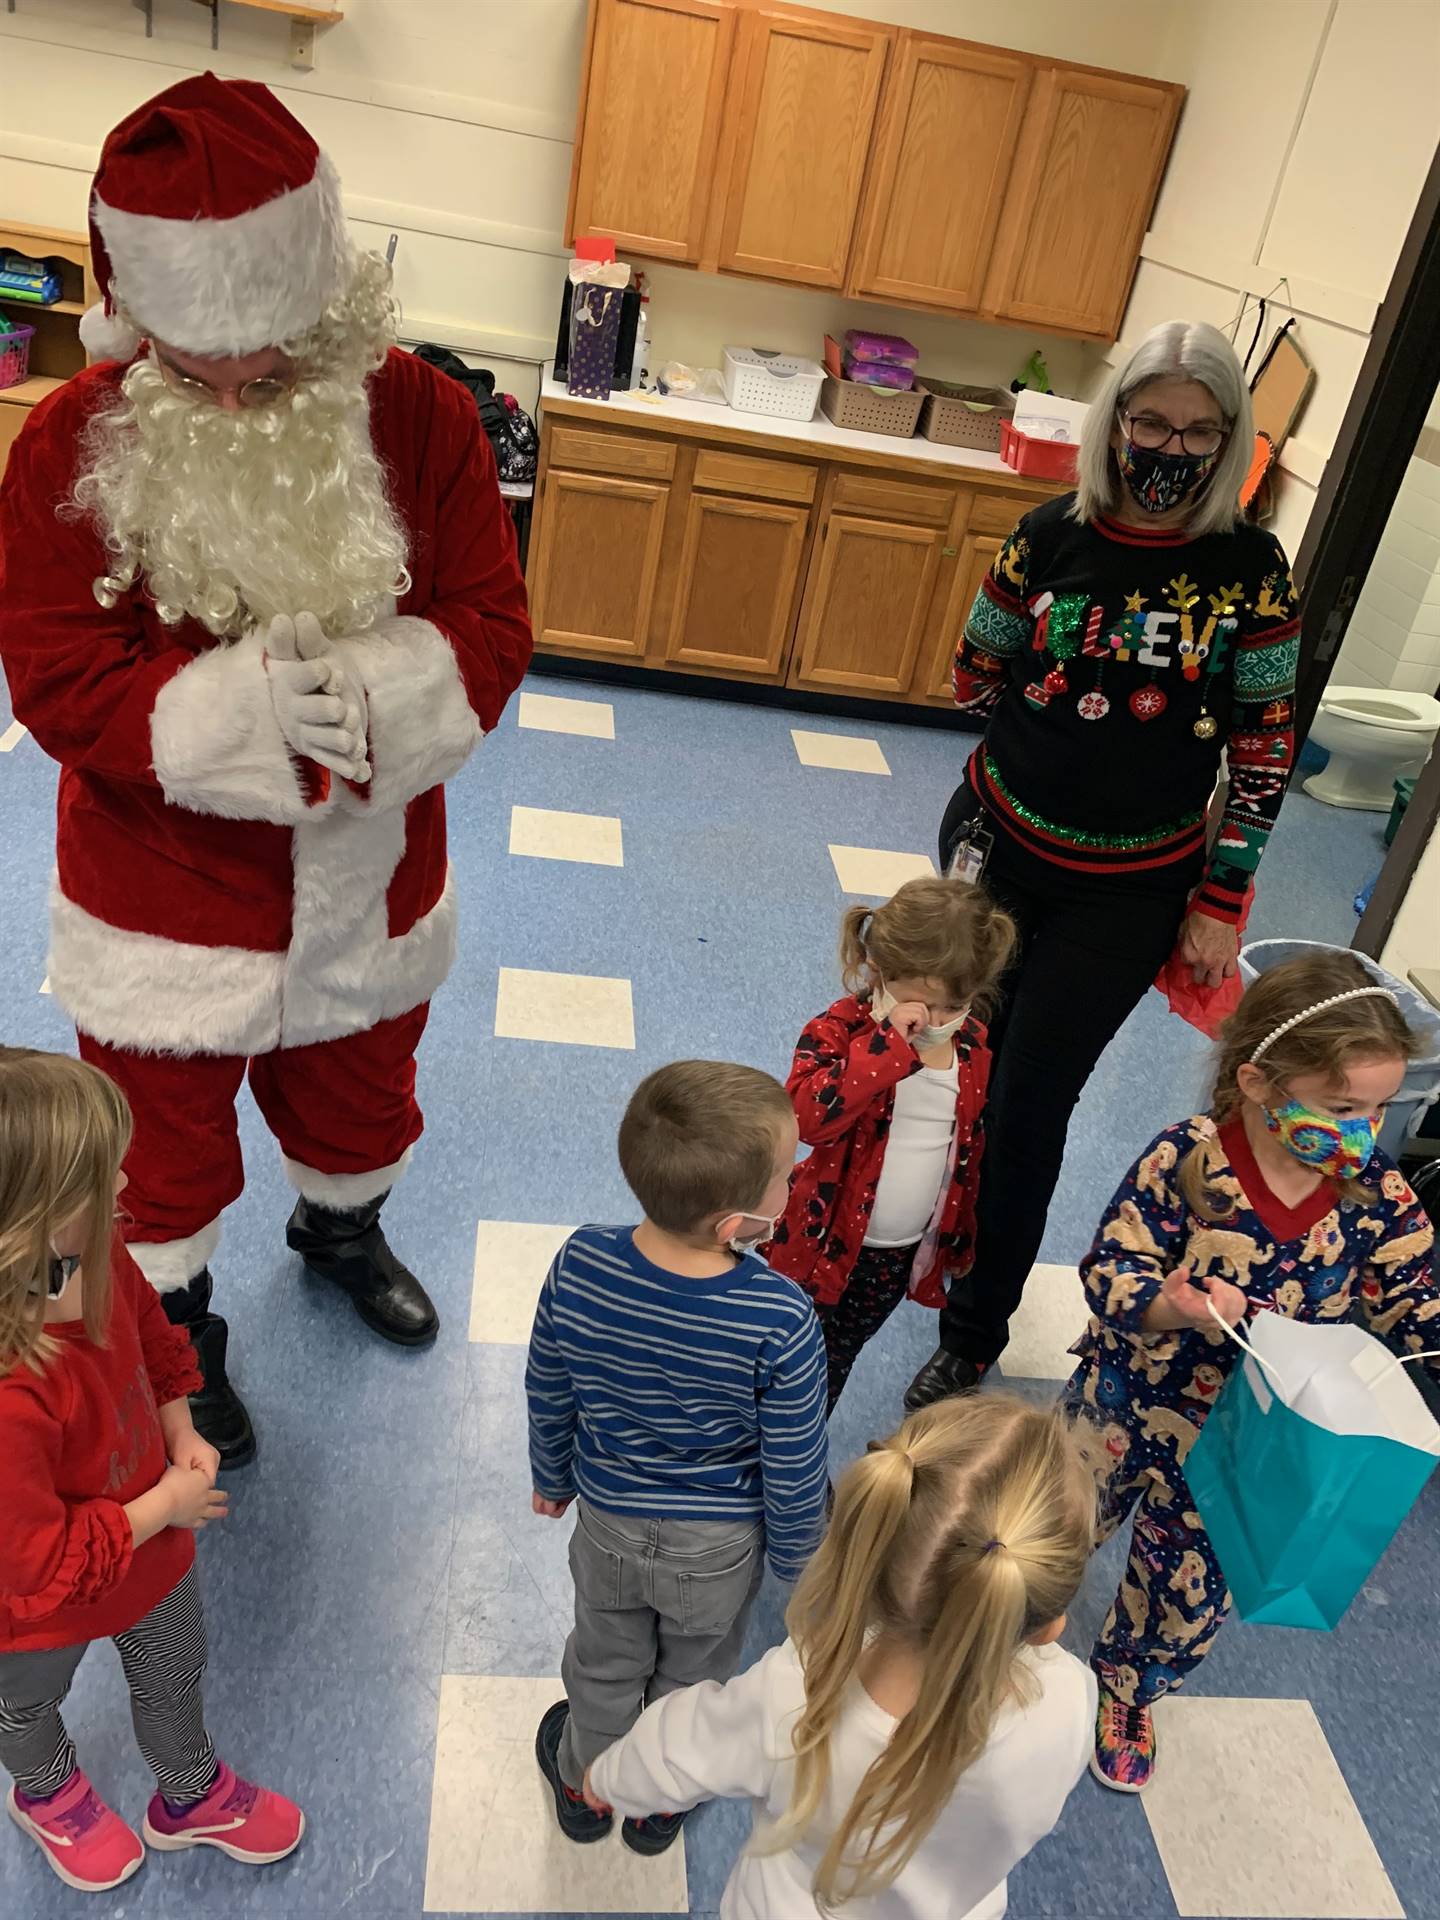 Santa is talking with 4 small children while principal listens to children.